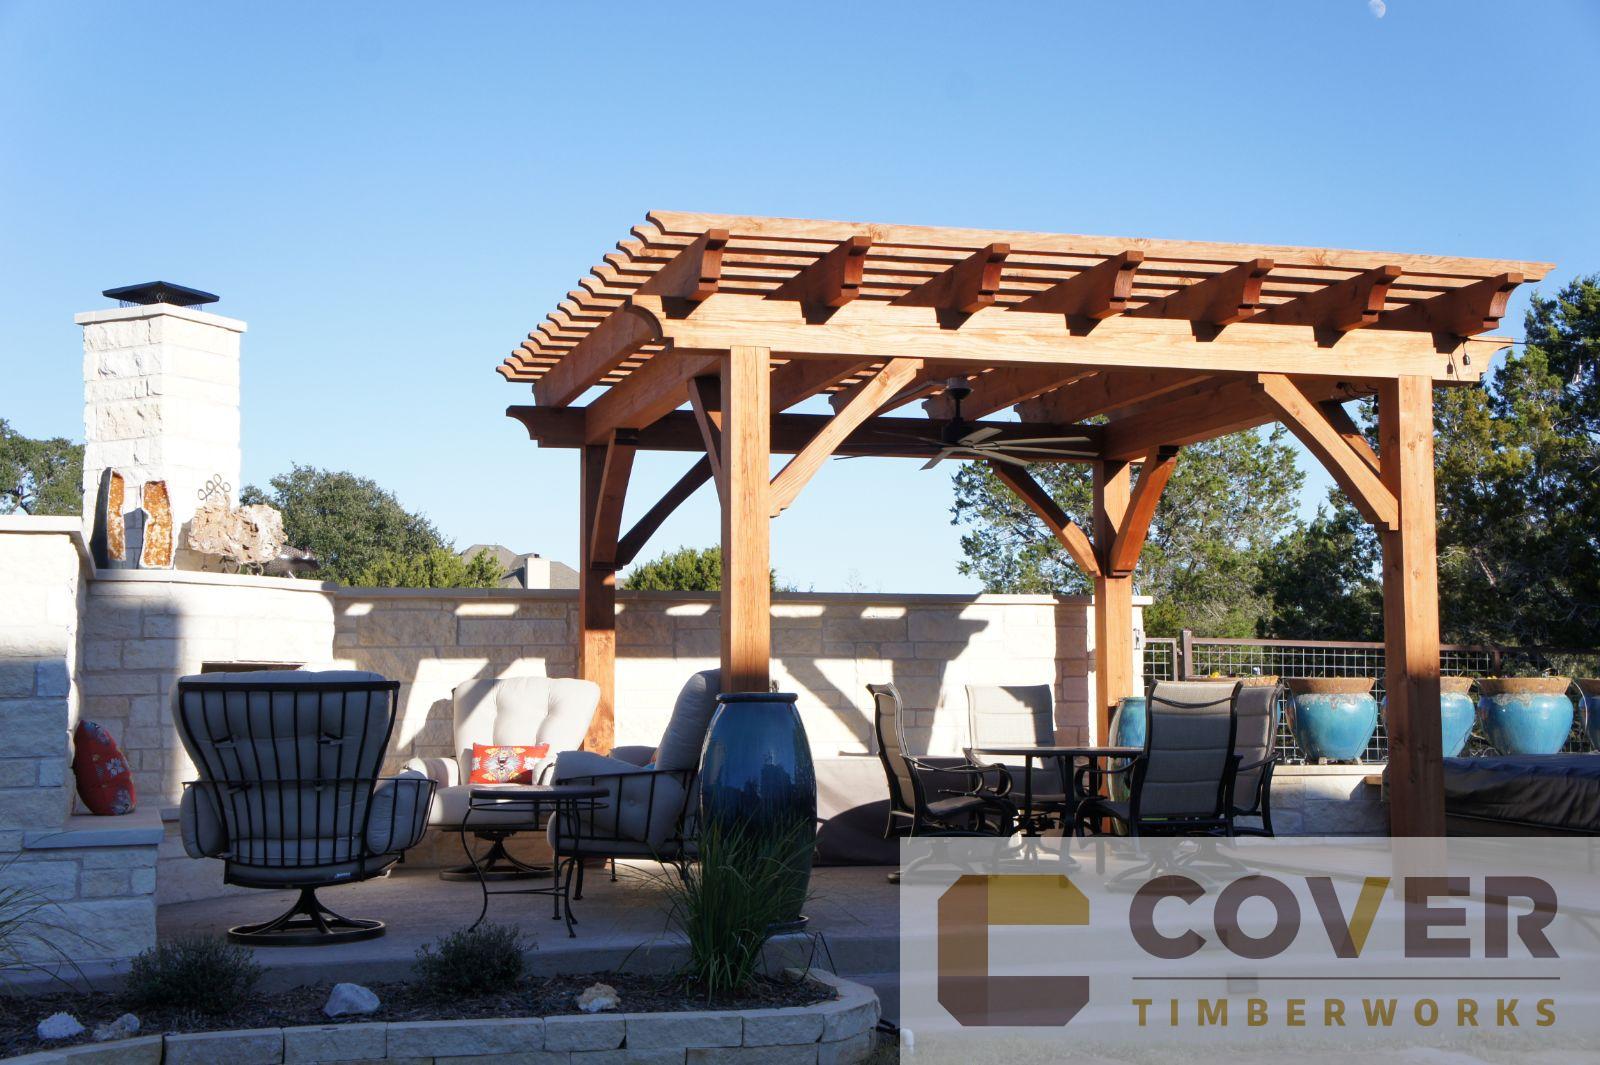 12x12, 15’ x 15’, Outdoor living, cement or concrete pad, patio furniture, residential, fire pit or fireplace, outdoor kitchen or kitchen, cabana, poolside or swimming pool, new Braunfels, entertaining, pergola kit, cedar pergola, free standing pergola